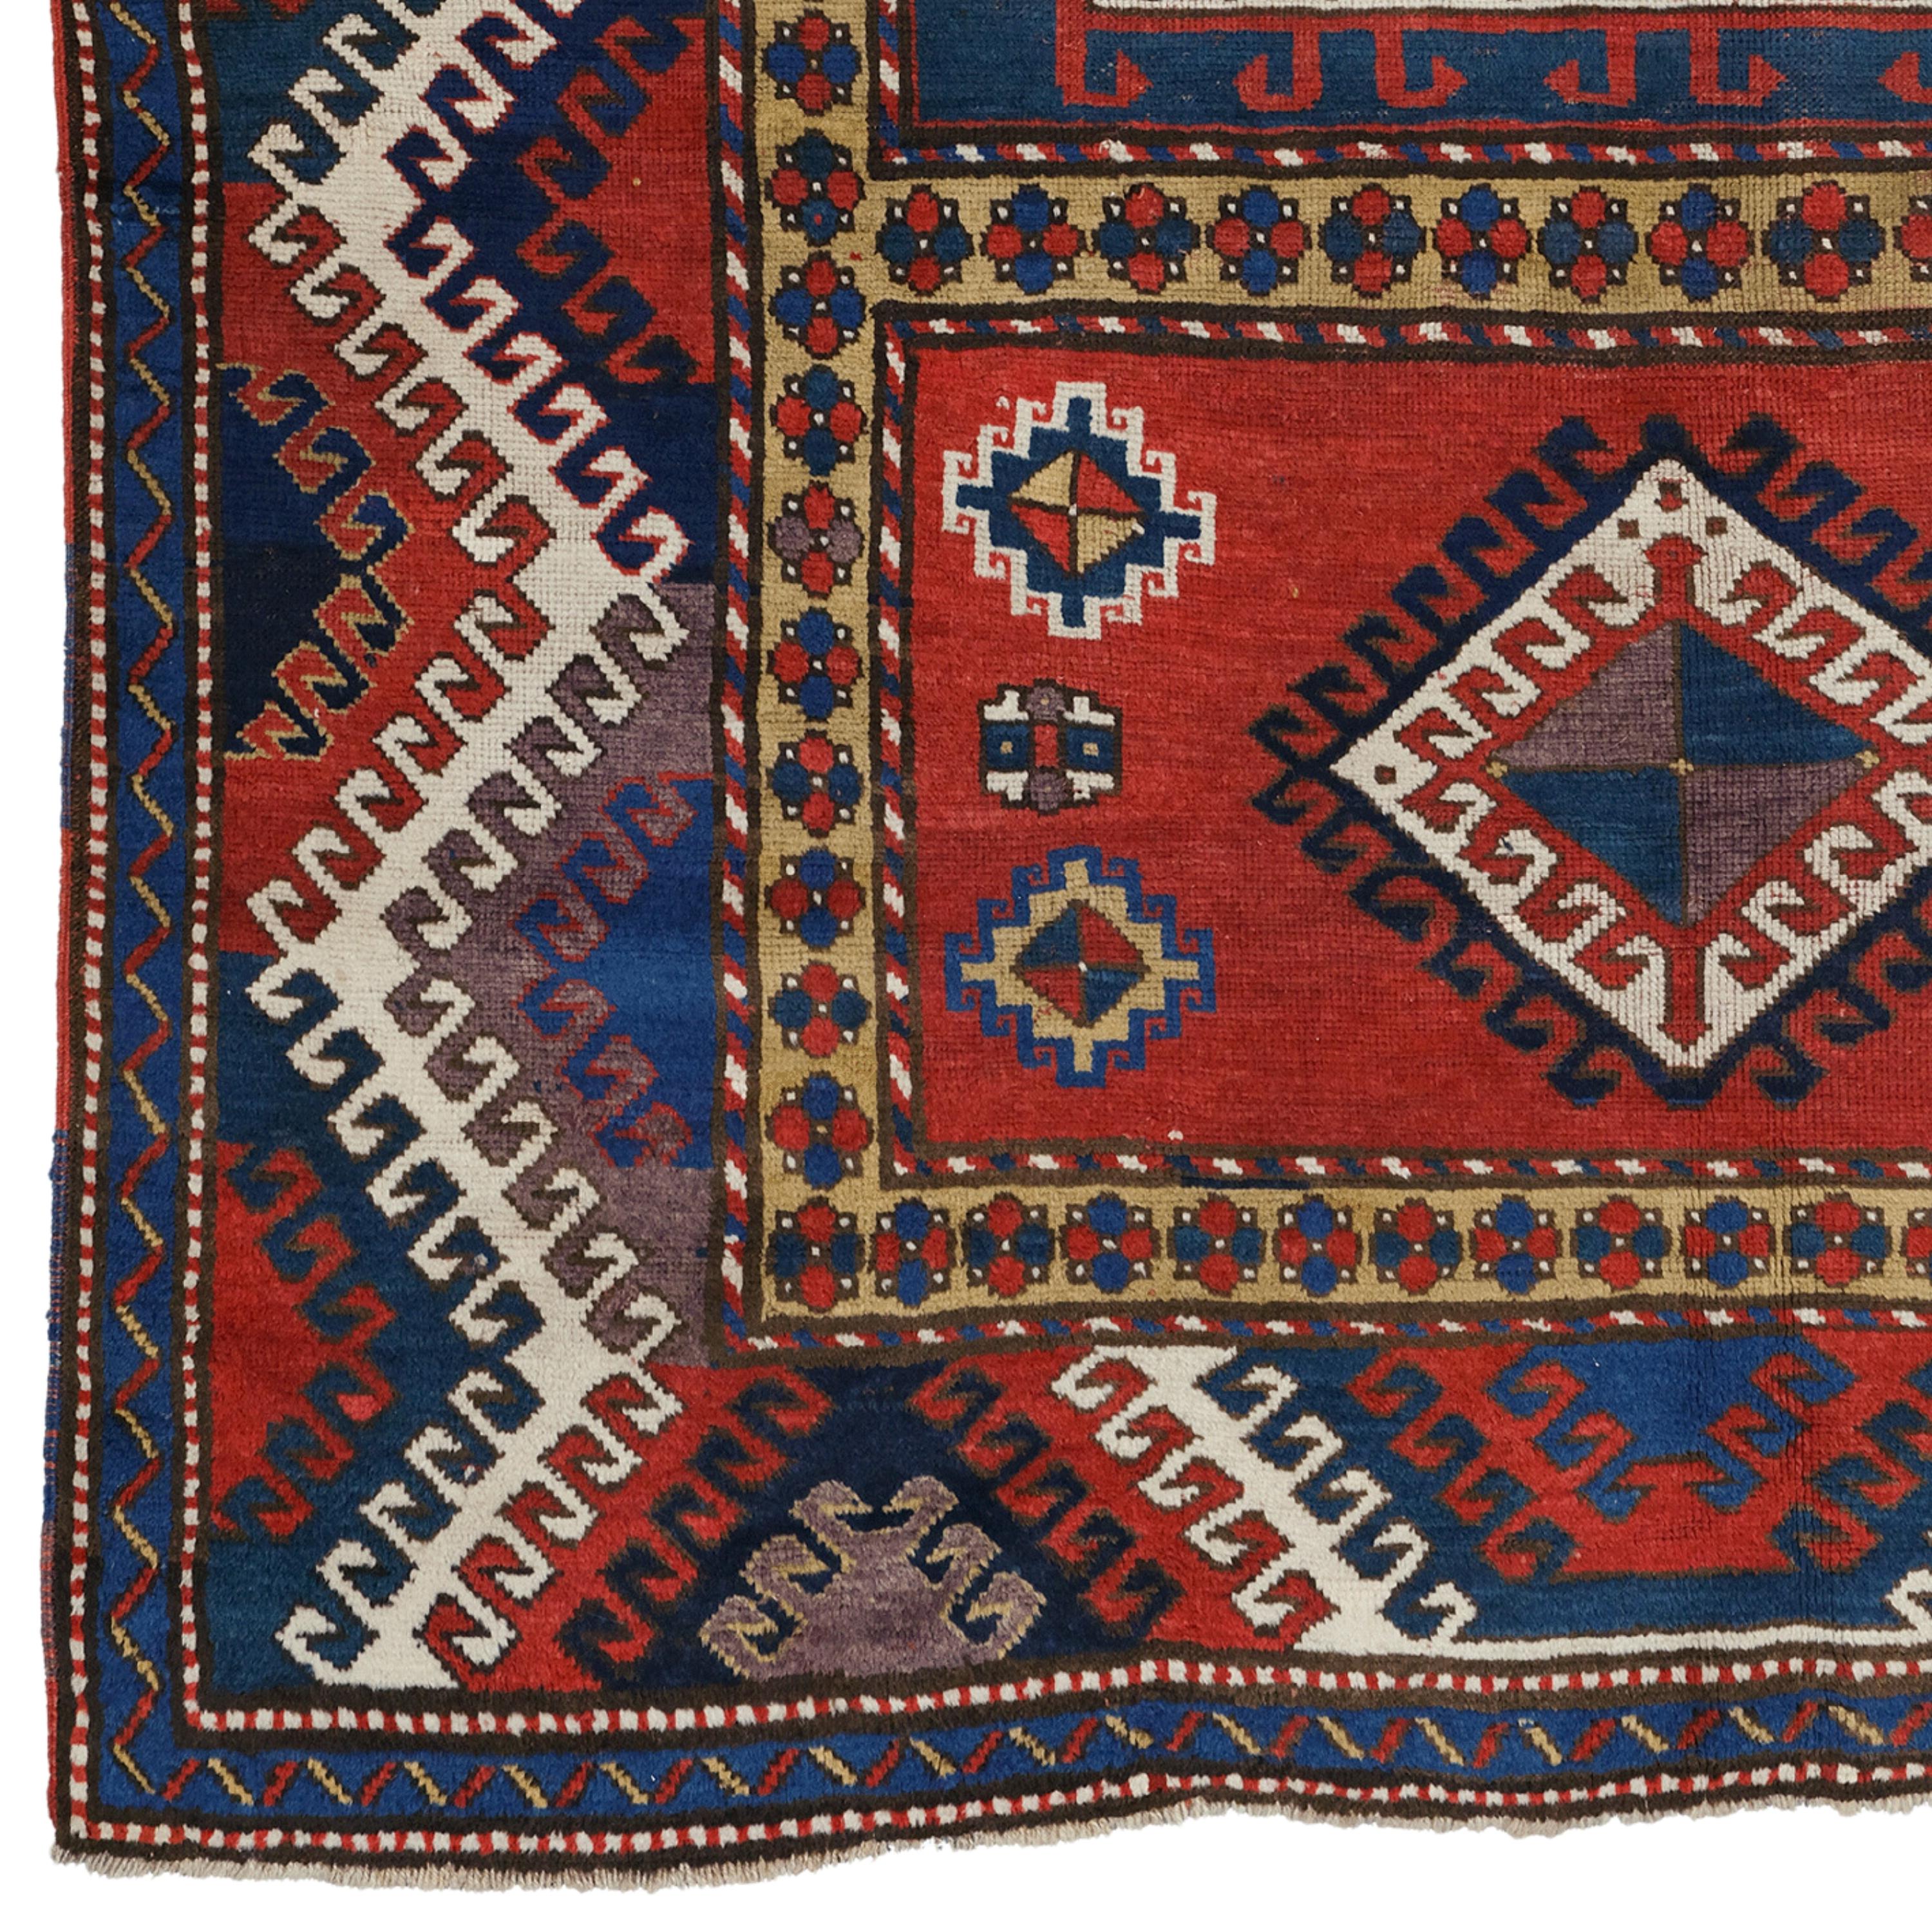 A Historical Masterpiece: Antique Caucasian Bordjalou Rug, Mid-19th Century

If you want to add historical and artistic value to your home, this antique carpet is for you. This carpet is a Caucasian Bordjalou carpet from the mid-19th century.